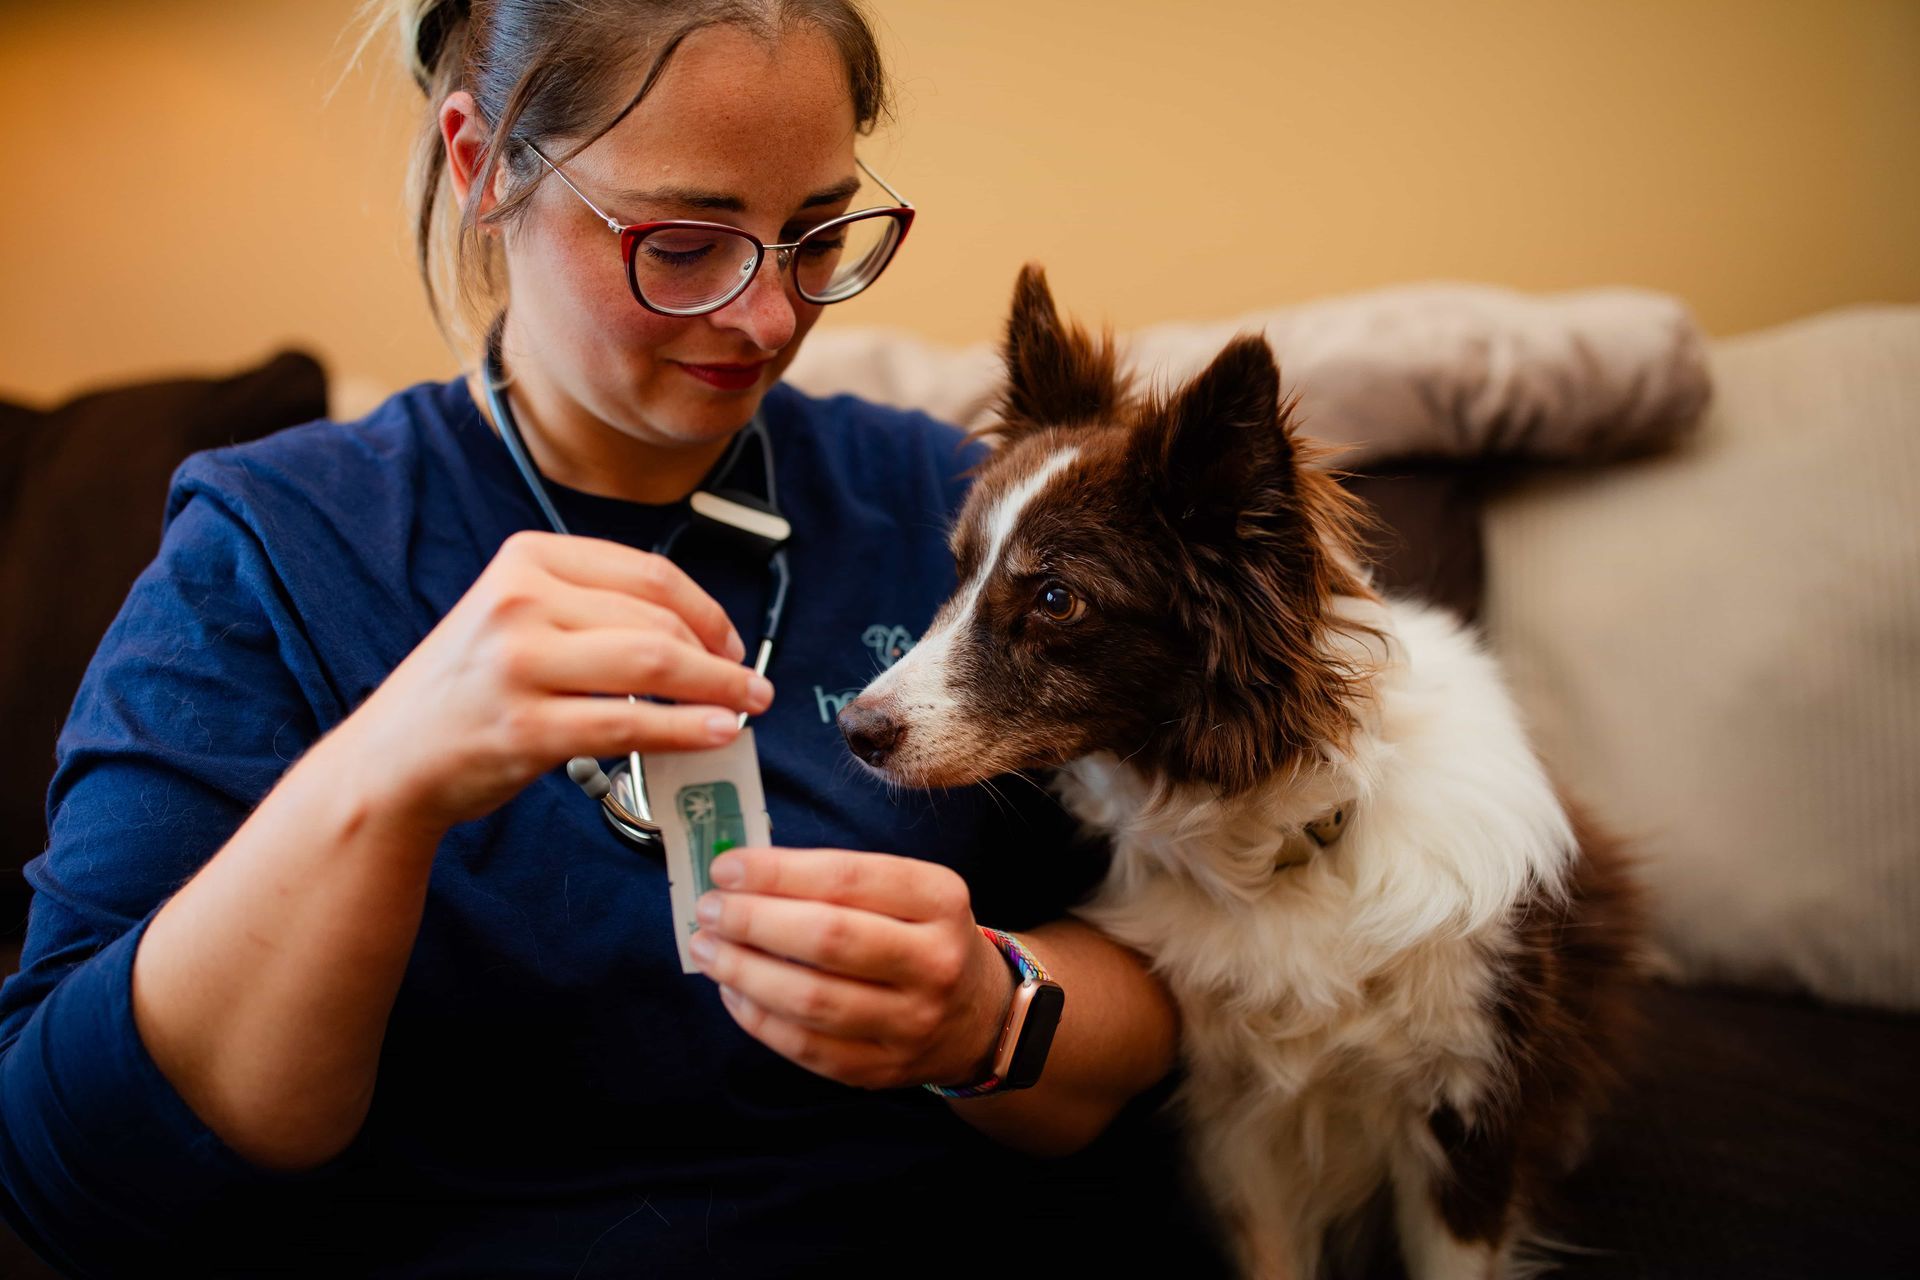 Dr. Jessi Turner is holding a stethoscope next to a brown and white dog .